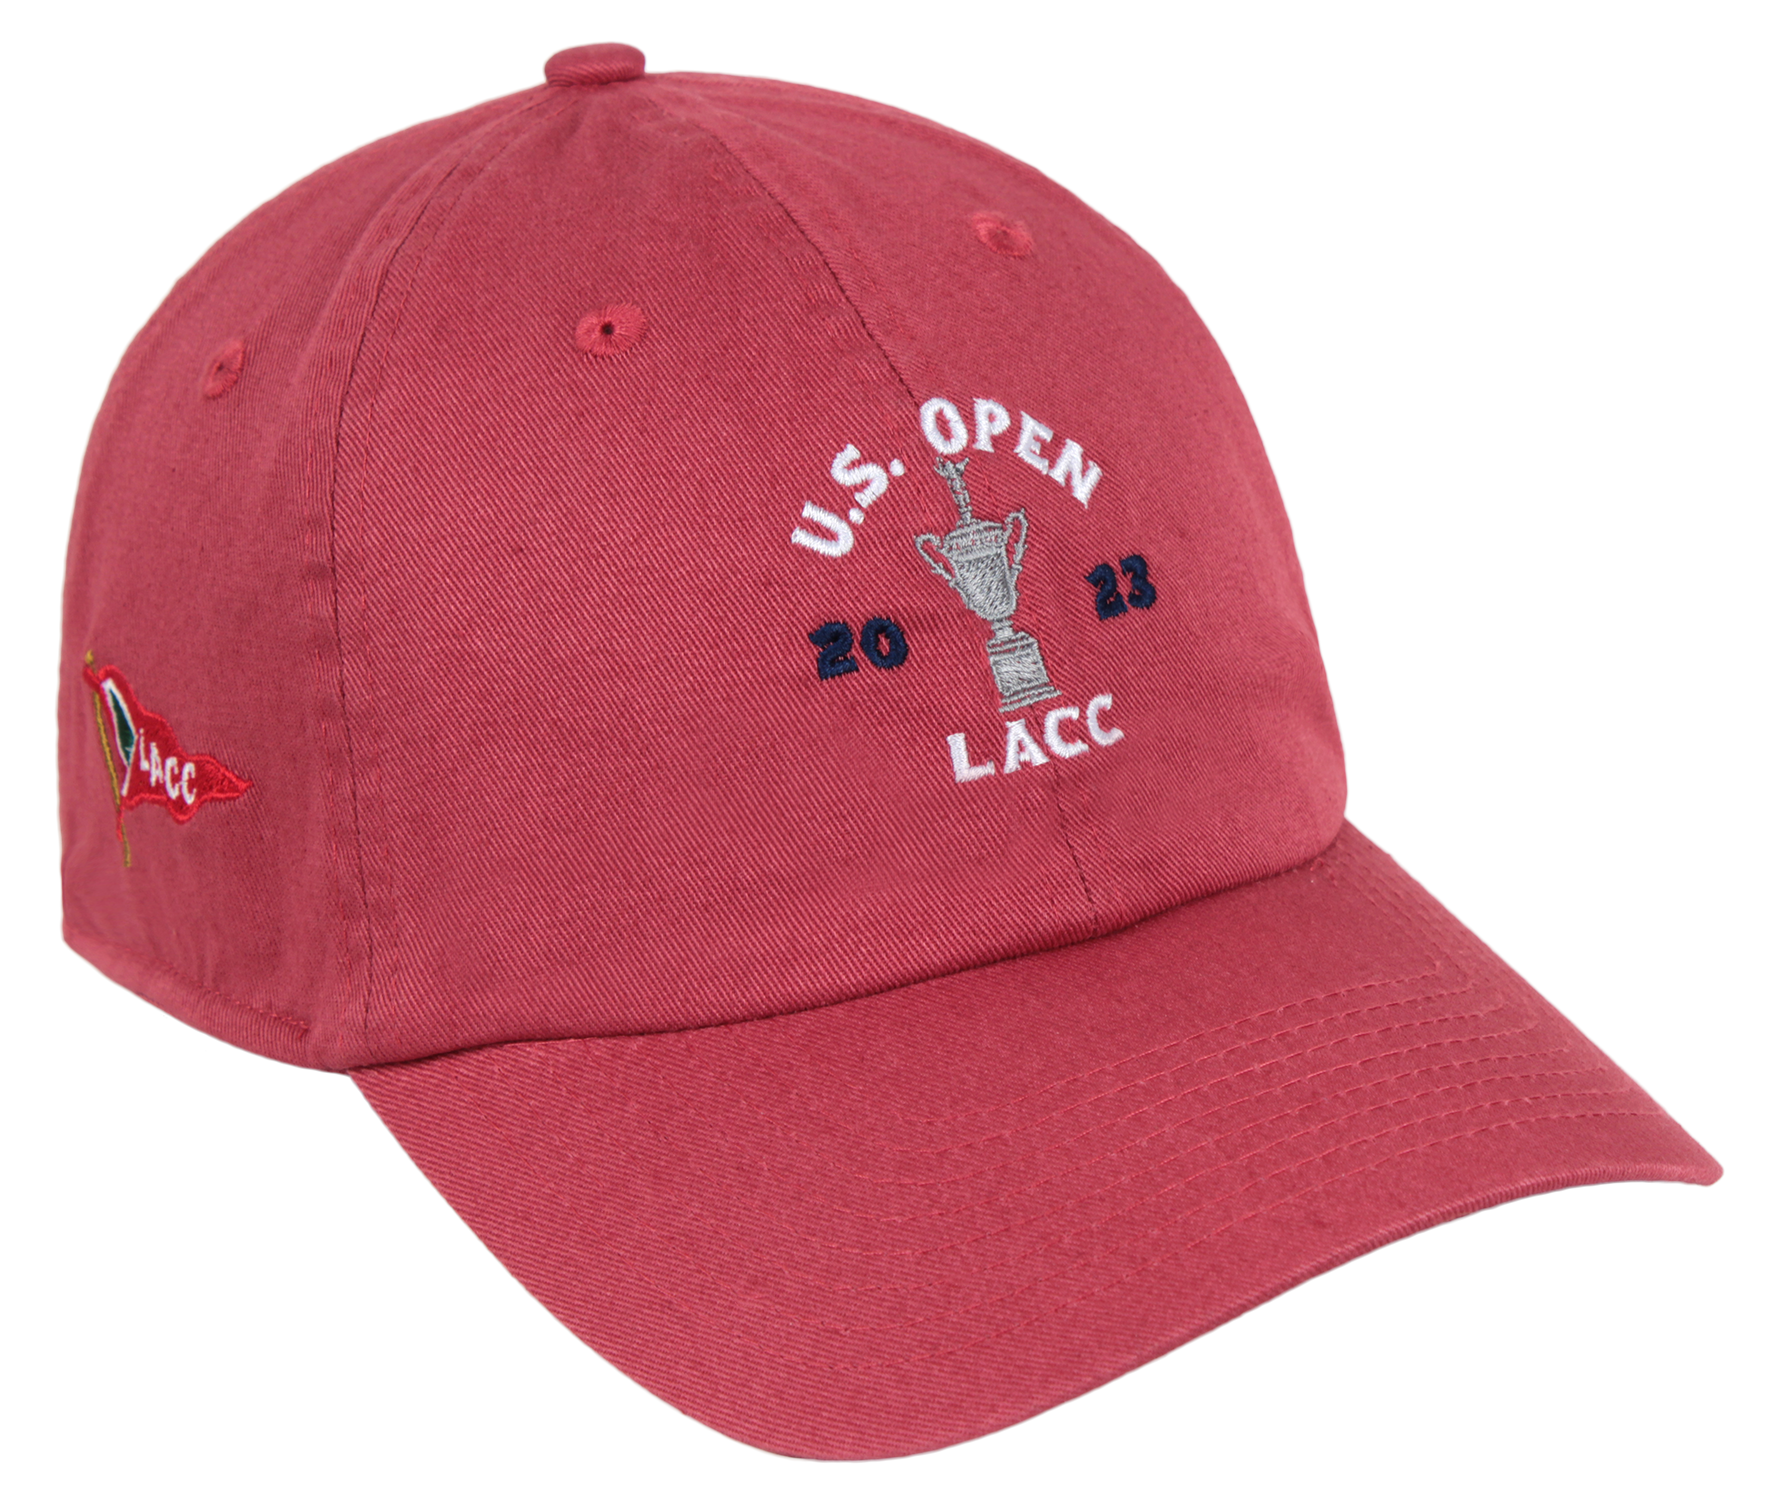 U.S. Open Red Washed Cotton Twill Relaxed Fit Cap – Ahead USA Shop